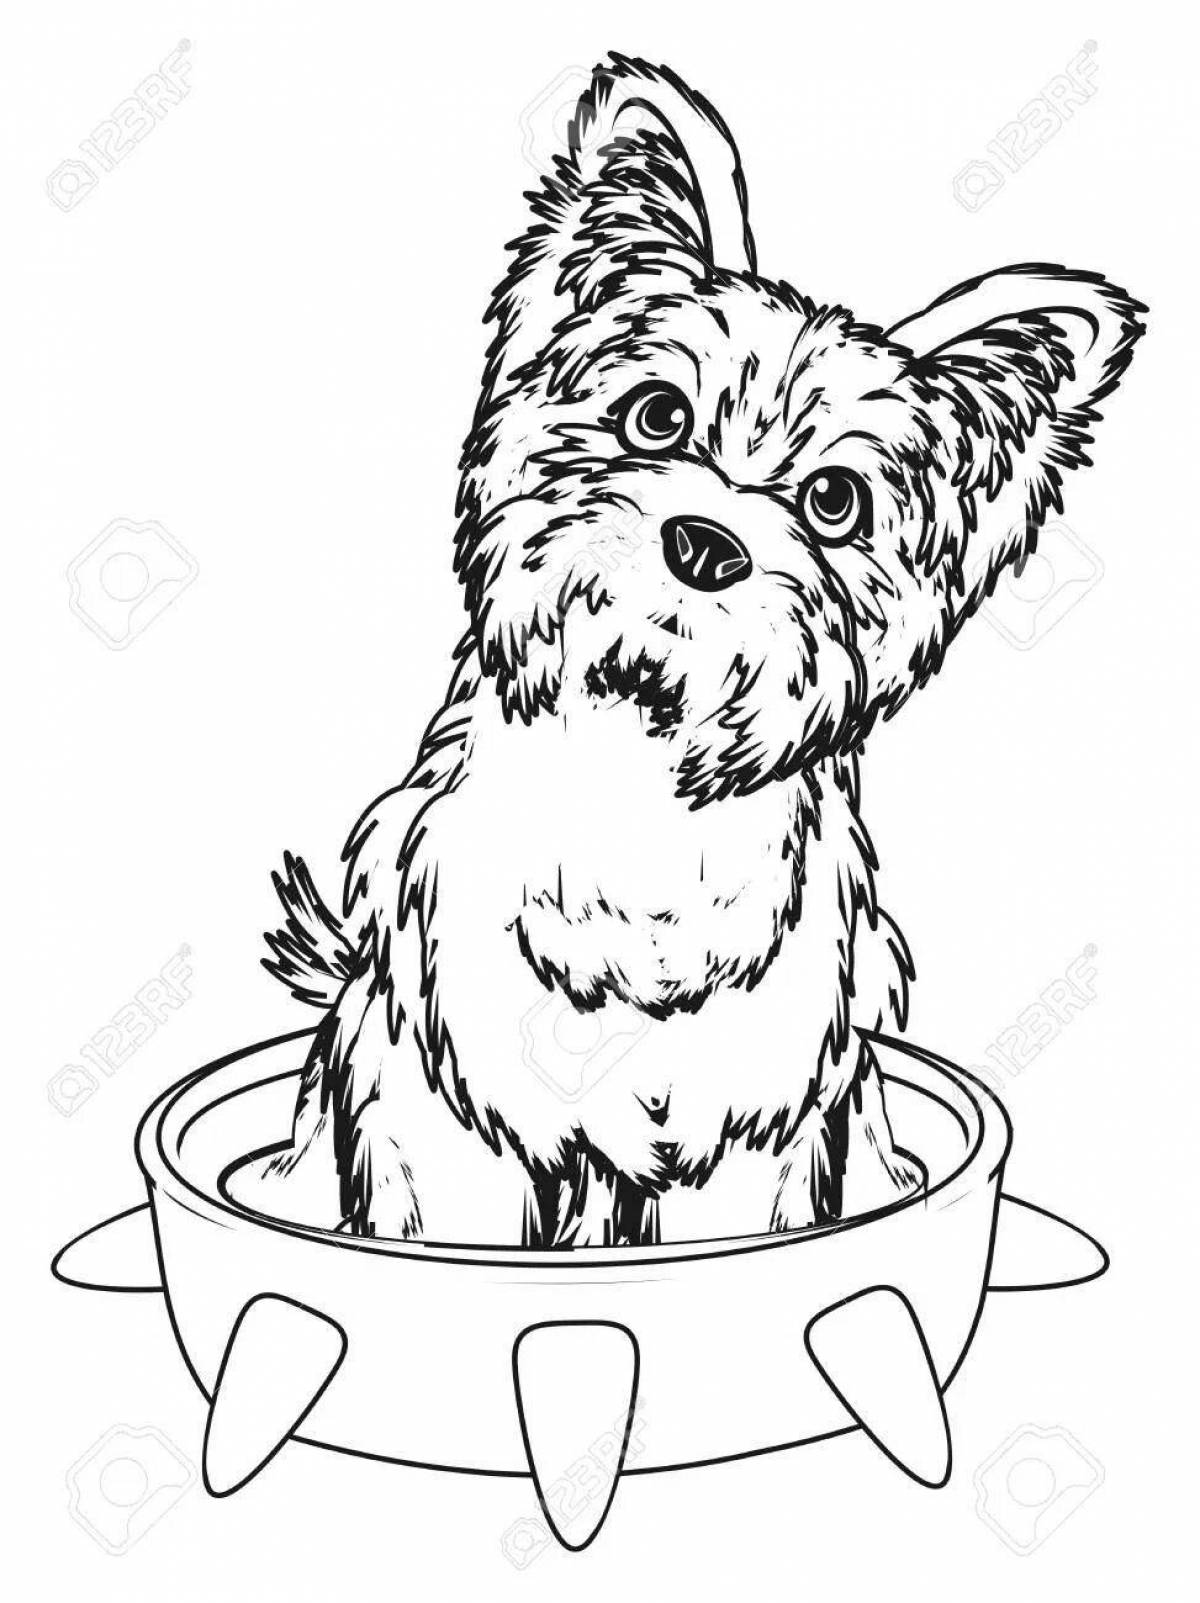 Coloring book brave yorkshire terrier